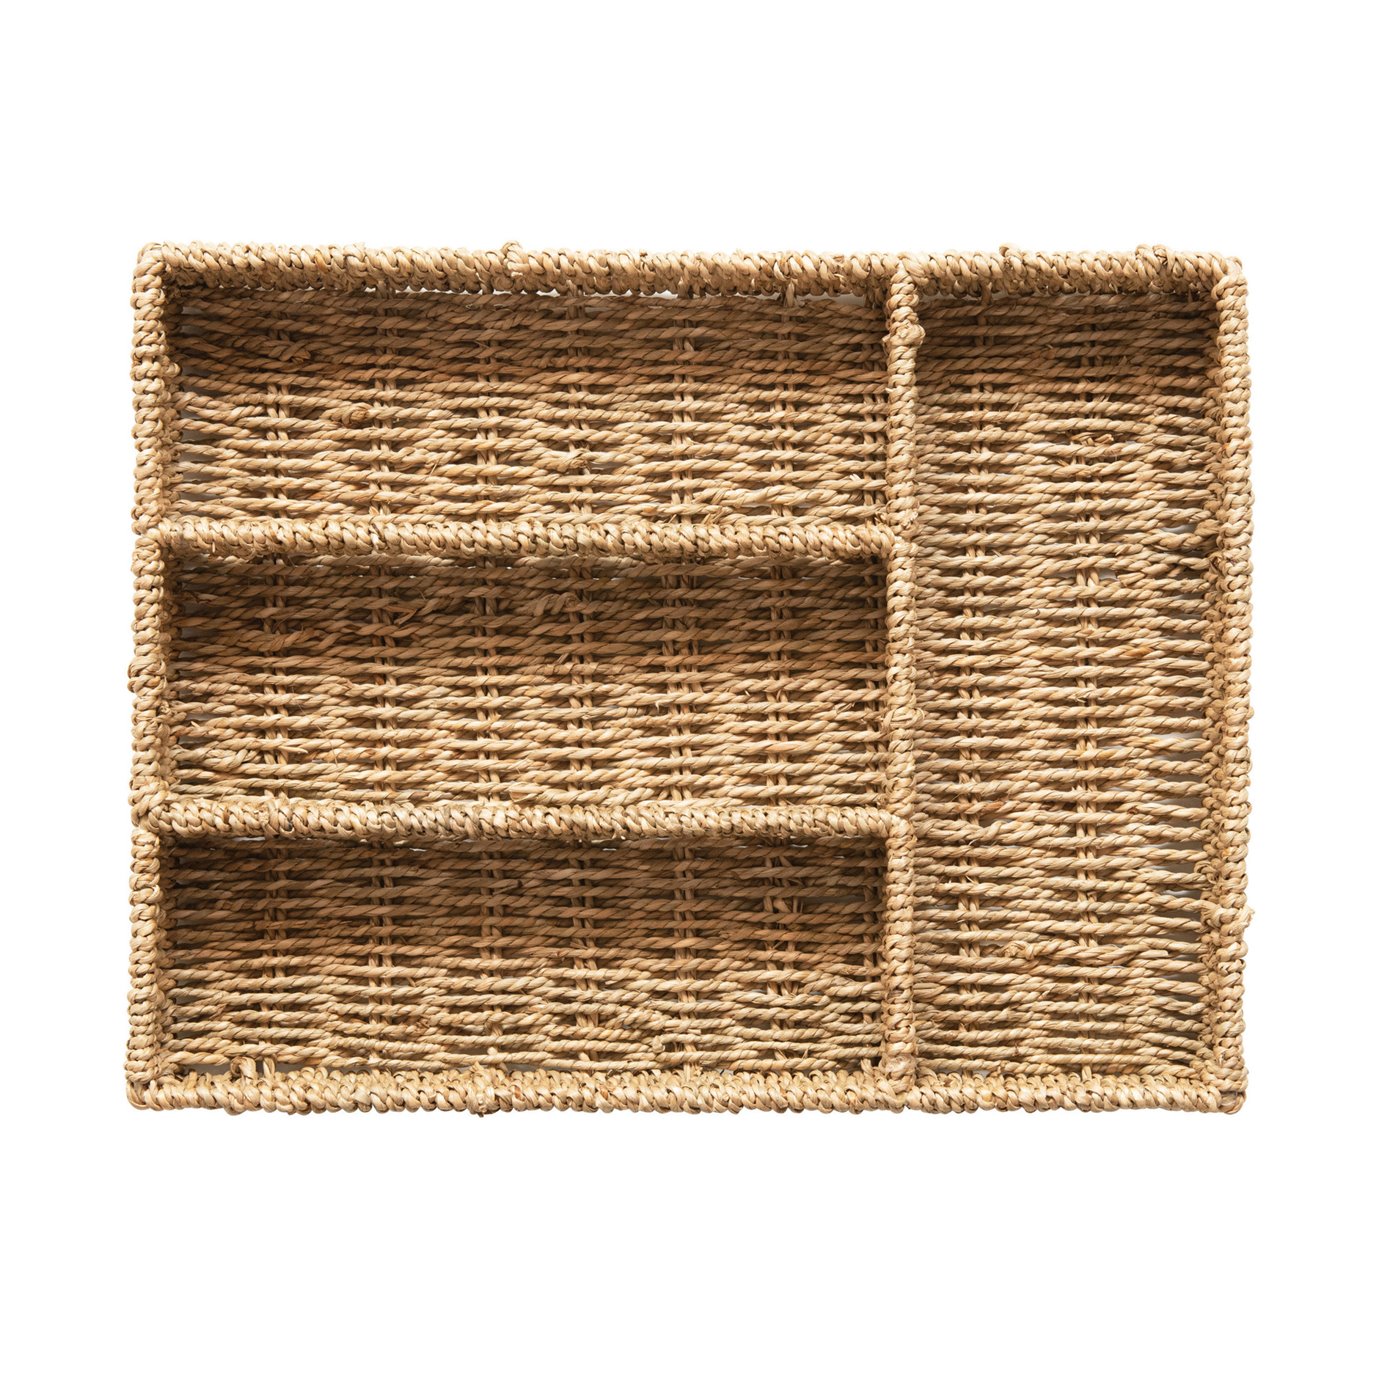 Hand-Woven Seagrass Tray with 4 Sections, Natural